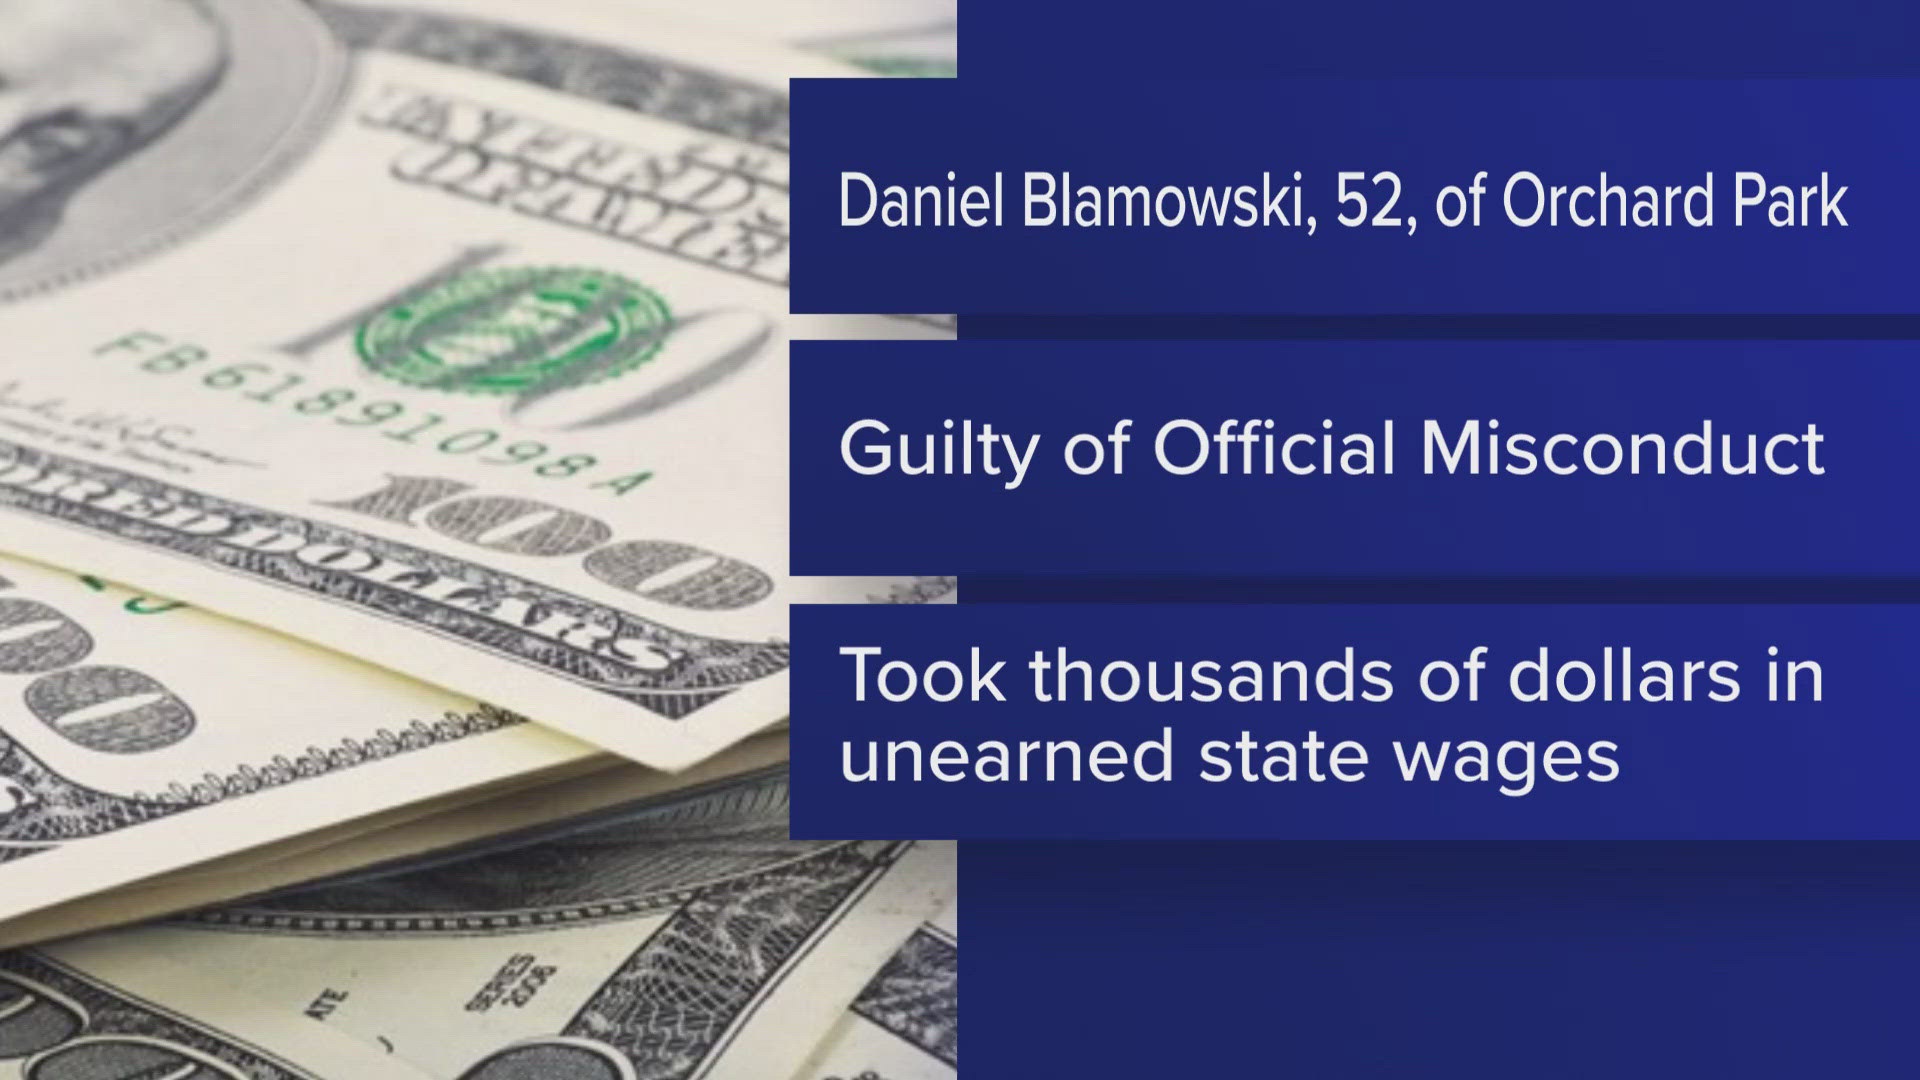 Blamowski faces a maximum of 1 year in jail. Until then he has been released on his own recognizance and as a part of his plea has been instructed to pay $4,111.51.